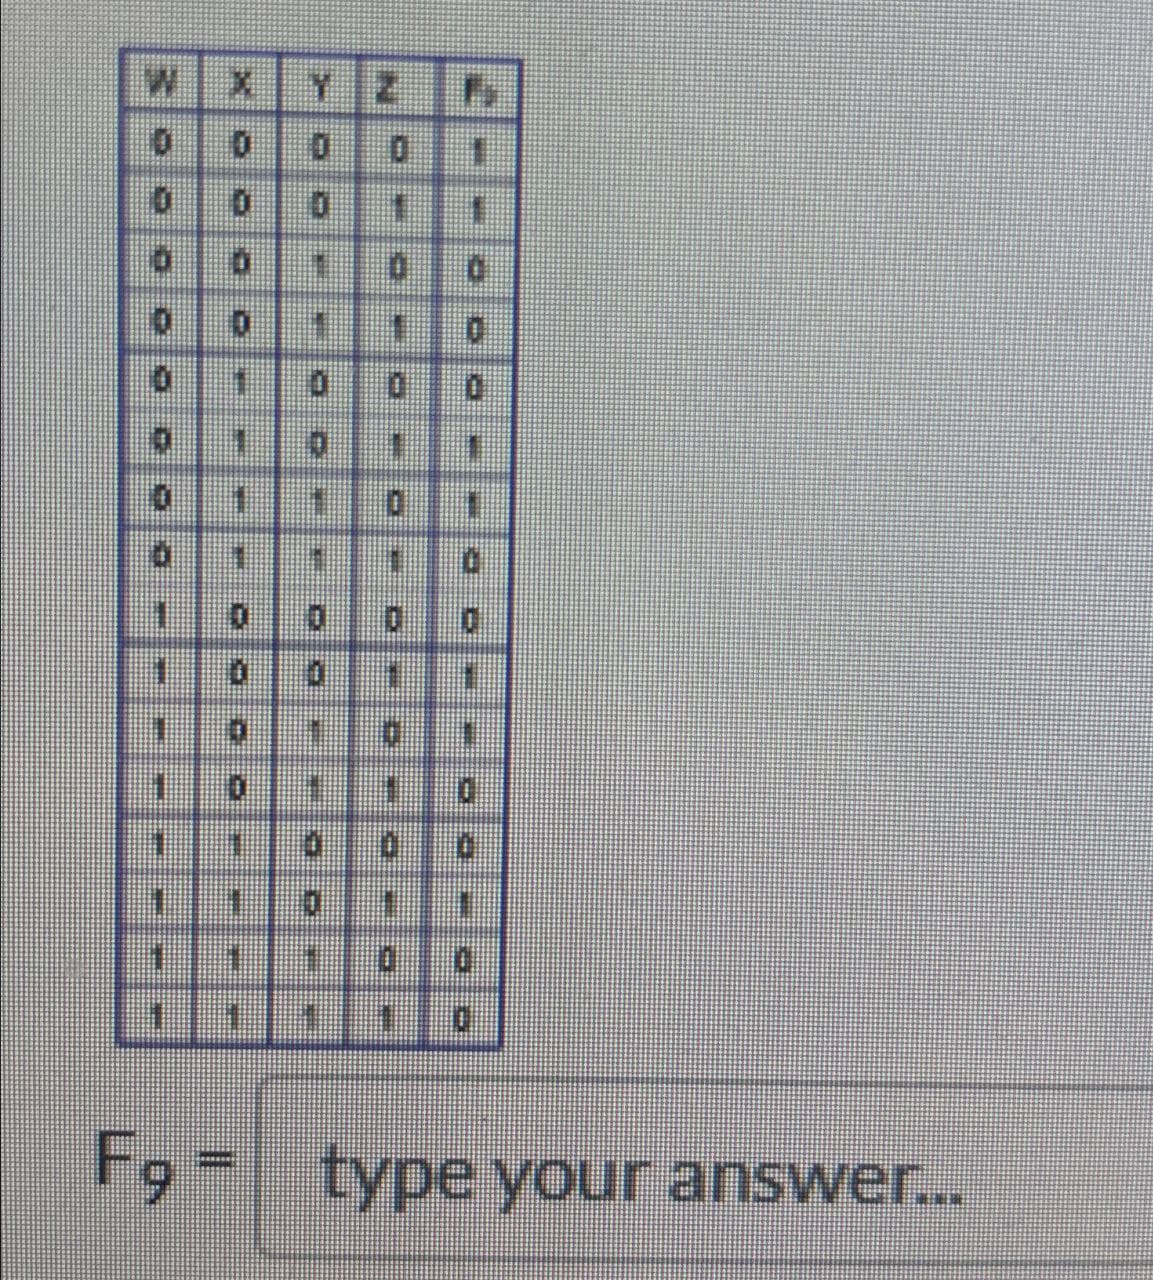 F9=
type your answer...
011
101
0110
11000
011
00
0000
1
0
0
10 1 1
101
0
0
YZ
01
X
0
0